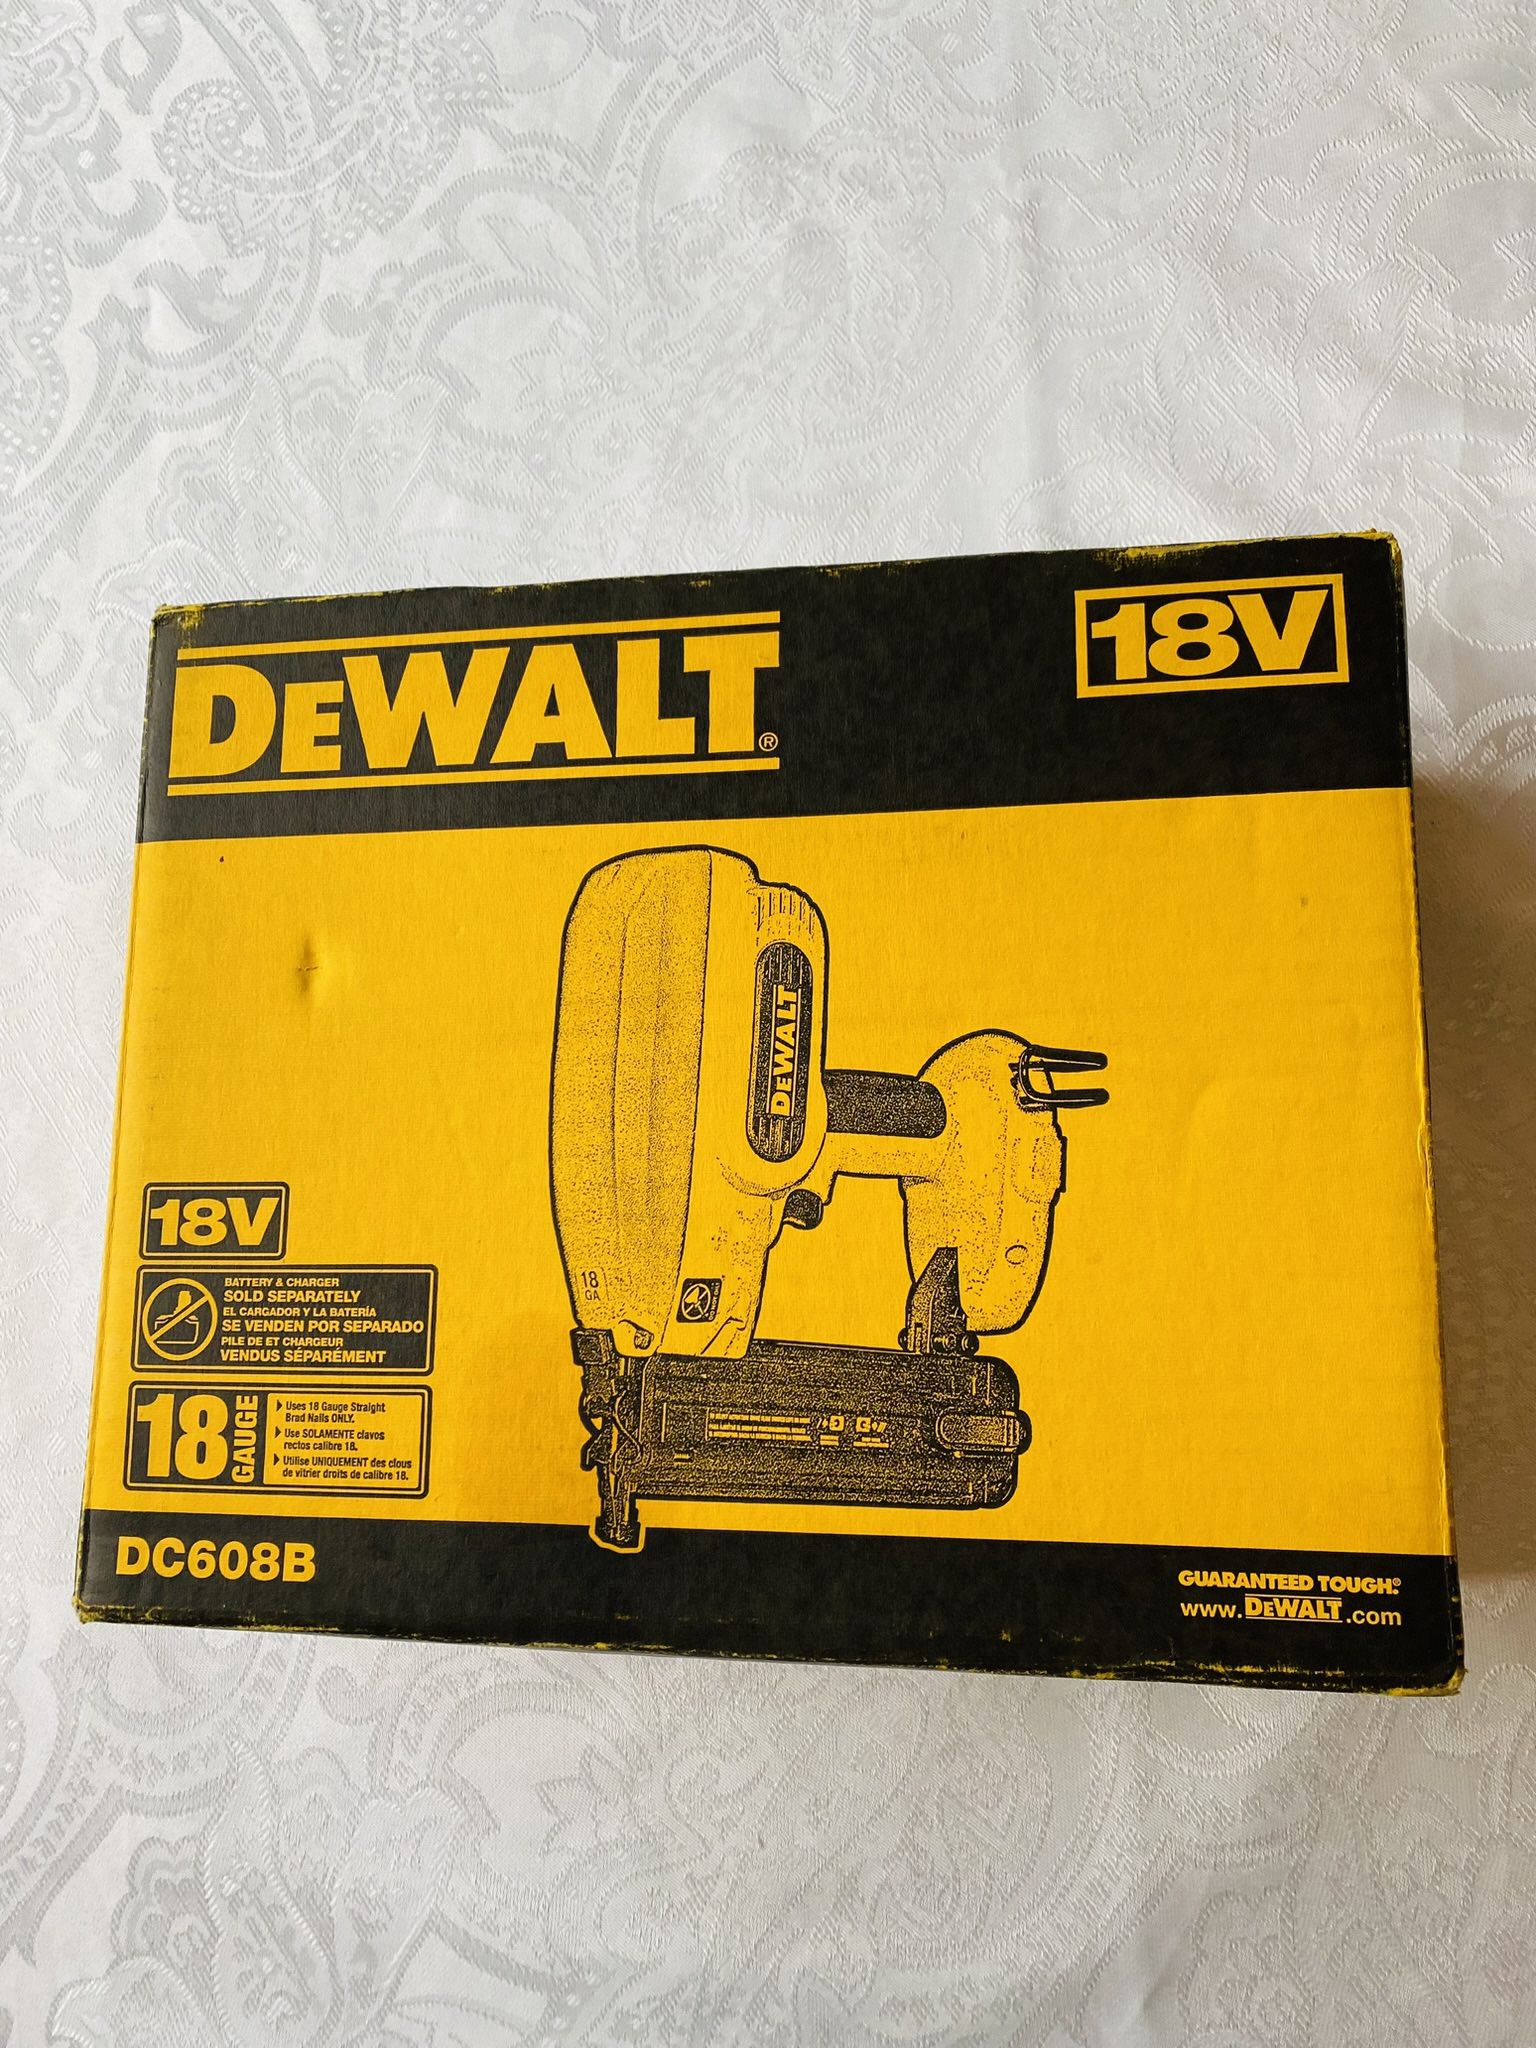 Famous DeWalt Nailer. Uses 18 Gauge Straight Brad Nails. 5/8”-2” (18 mm - 50 mm). New. Never used. Still sealed in original packaging. Price was $300 